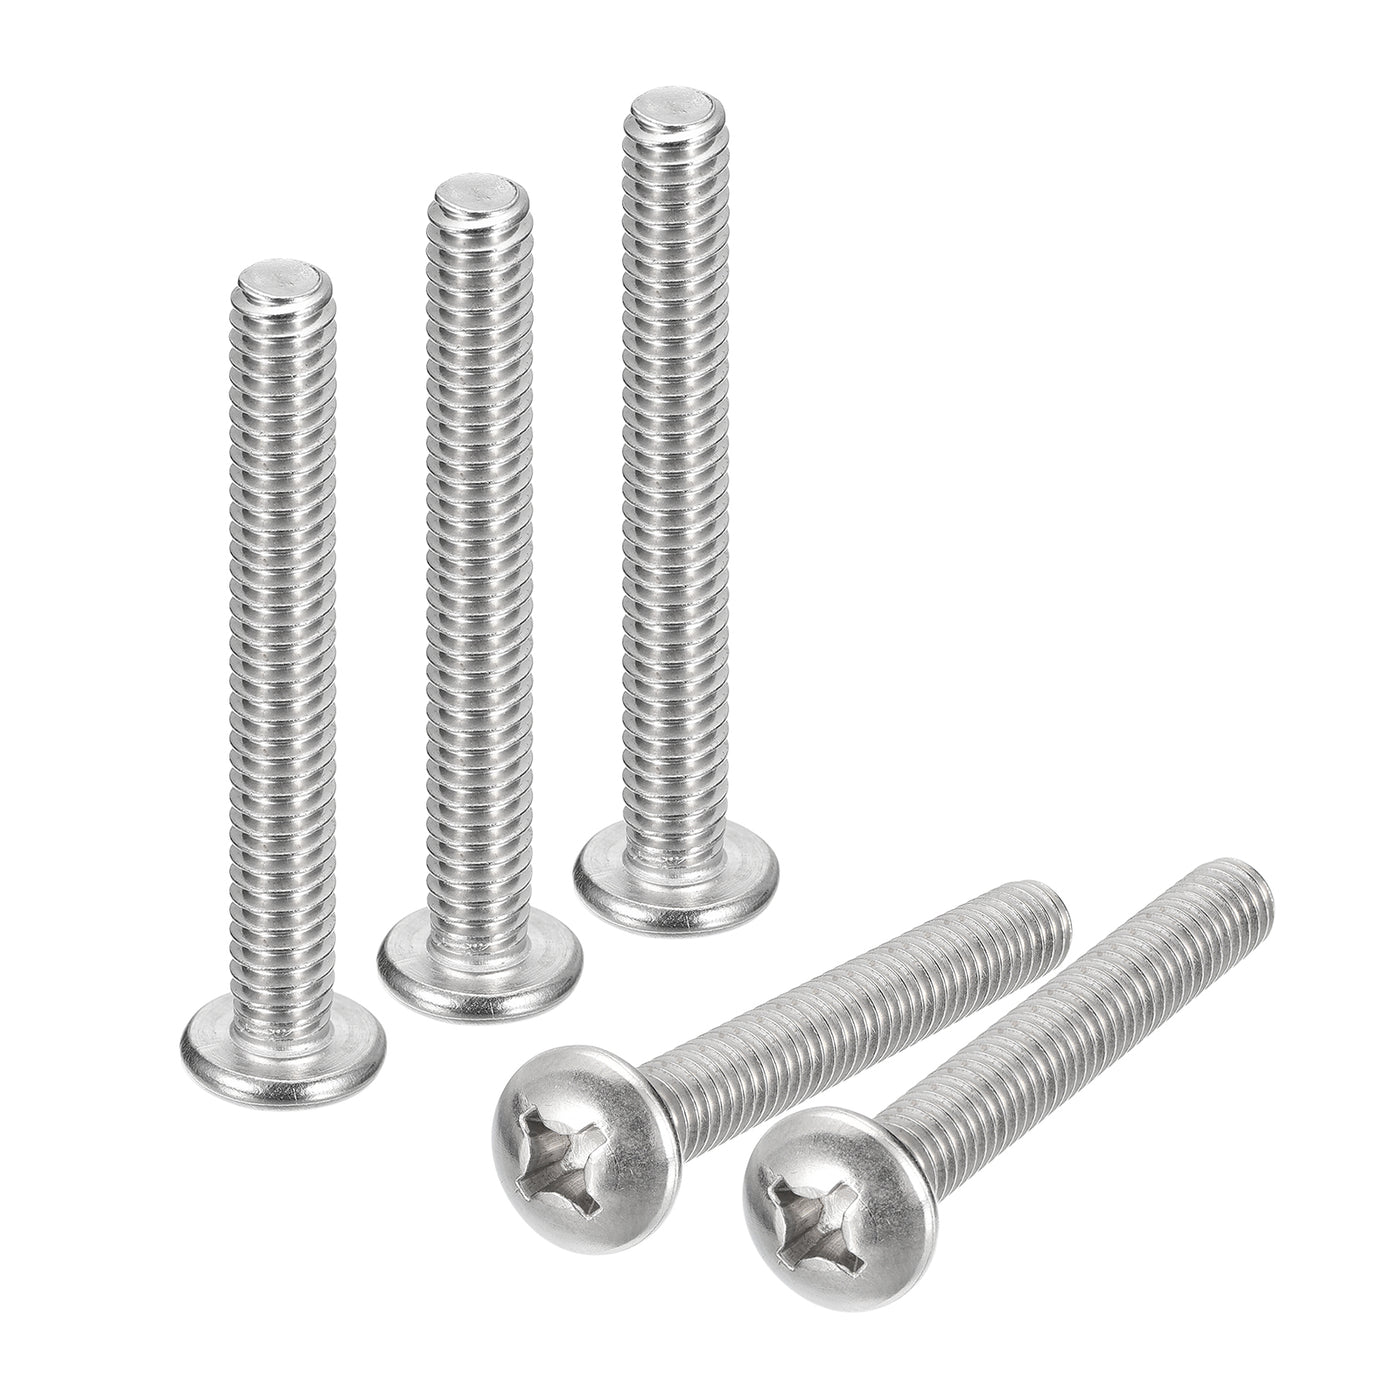 uxcell Uxcell 1/4-20x2" Pan Head Machine Screws, Stainless Steel 18-8 Screw, Pack of 10